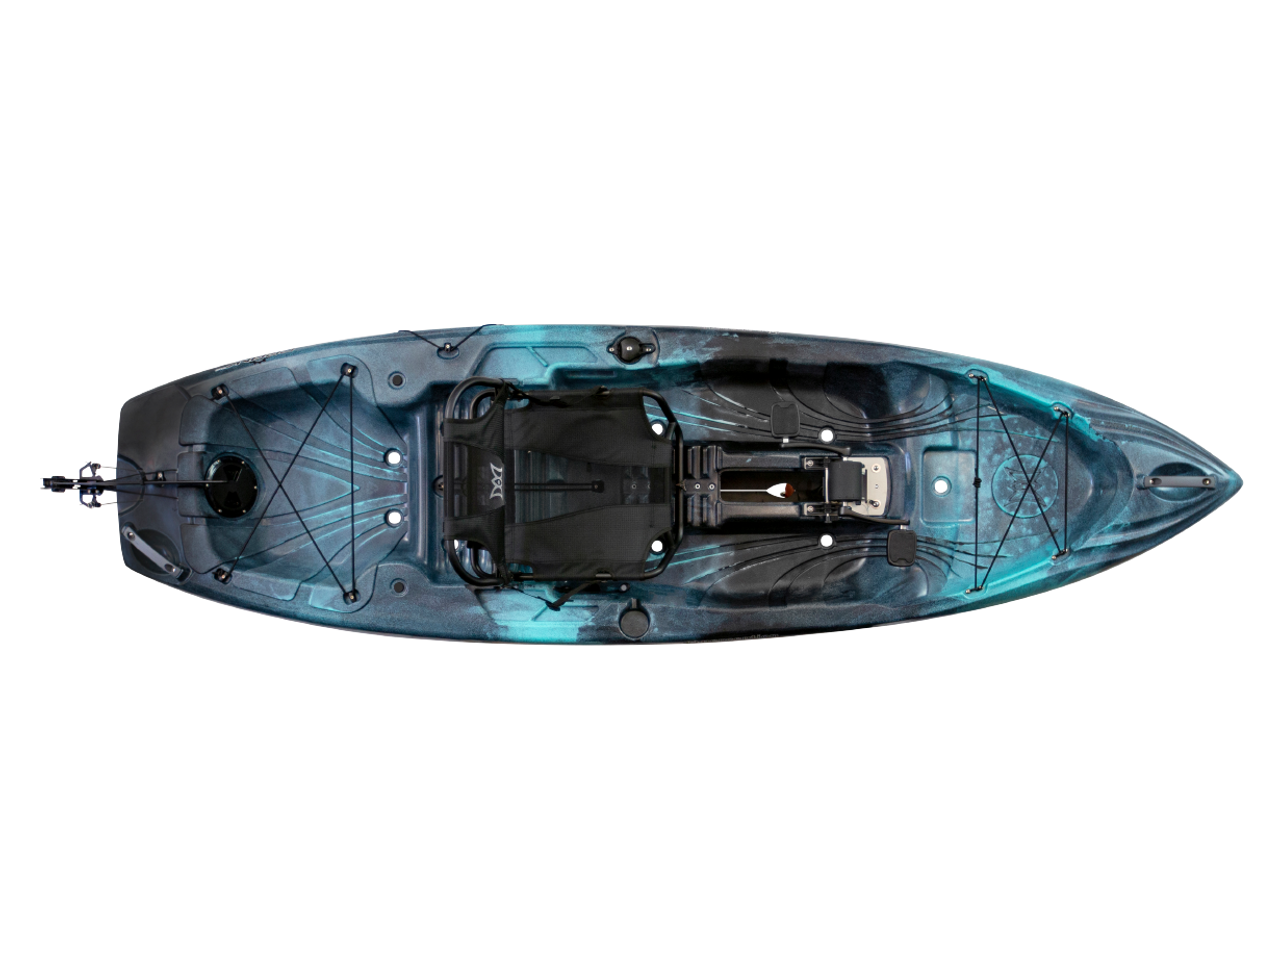 Crank 10.0 Recreational Pedal Kayak from Perception Kayaks - Solo Mounts,  Adjustable and Removable Seating